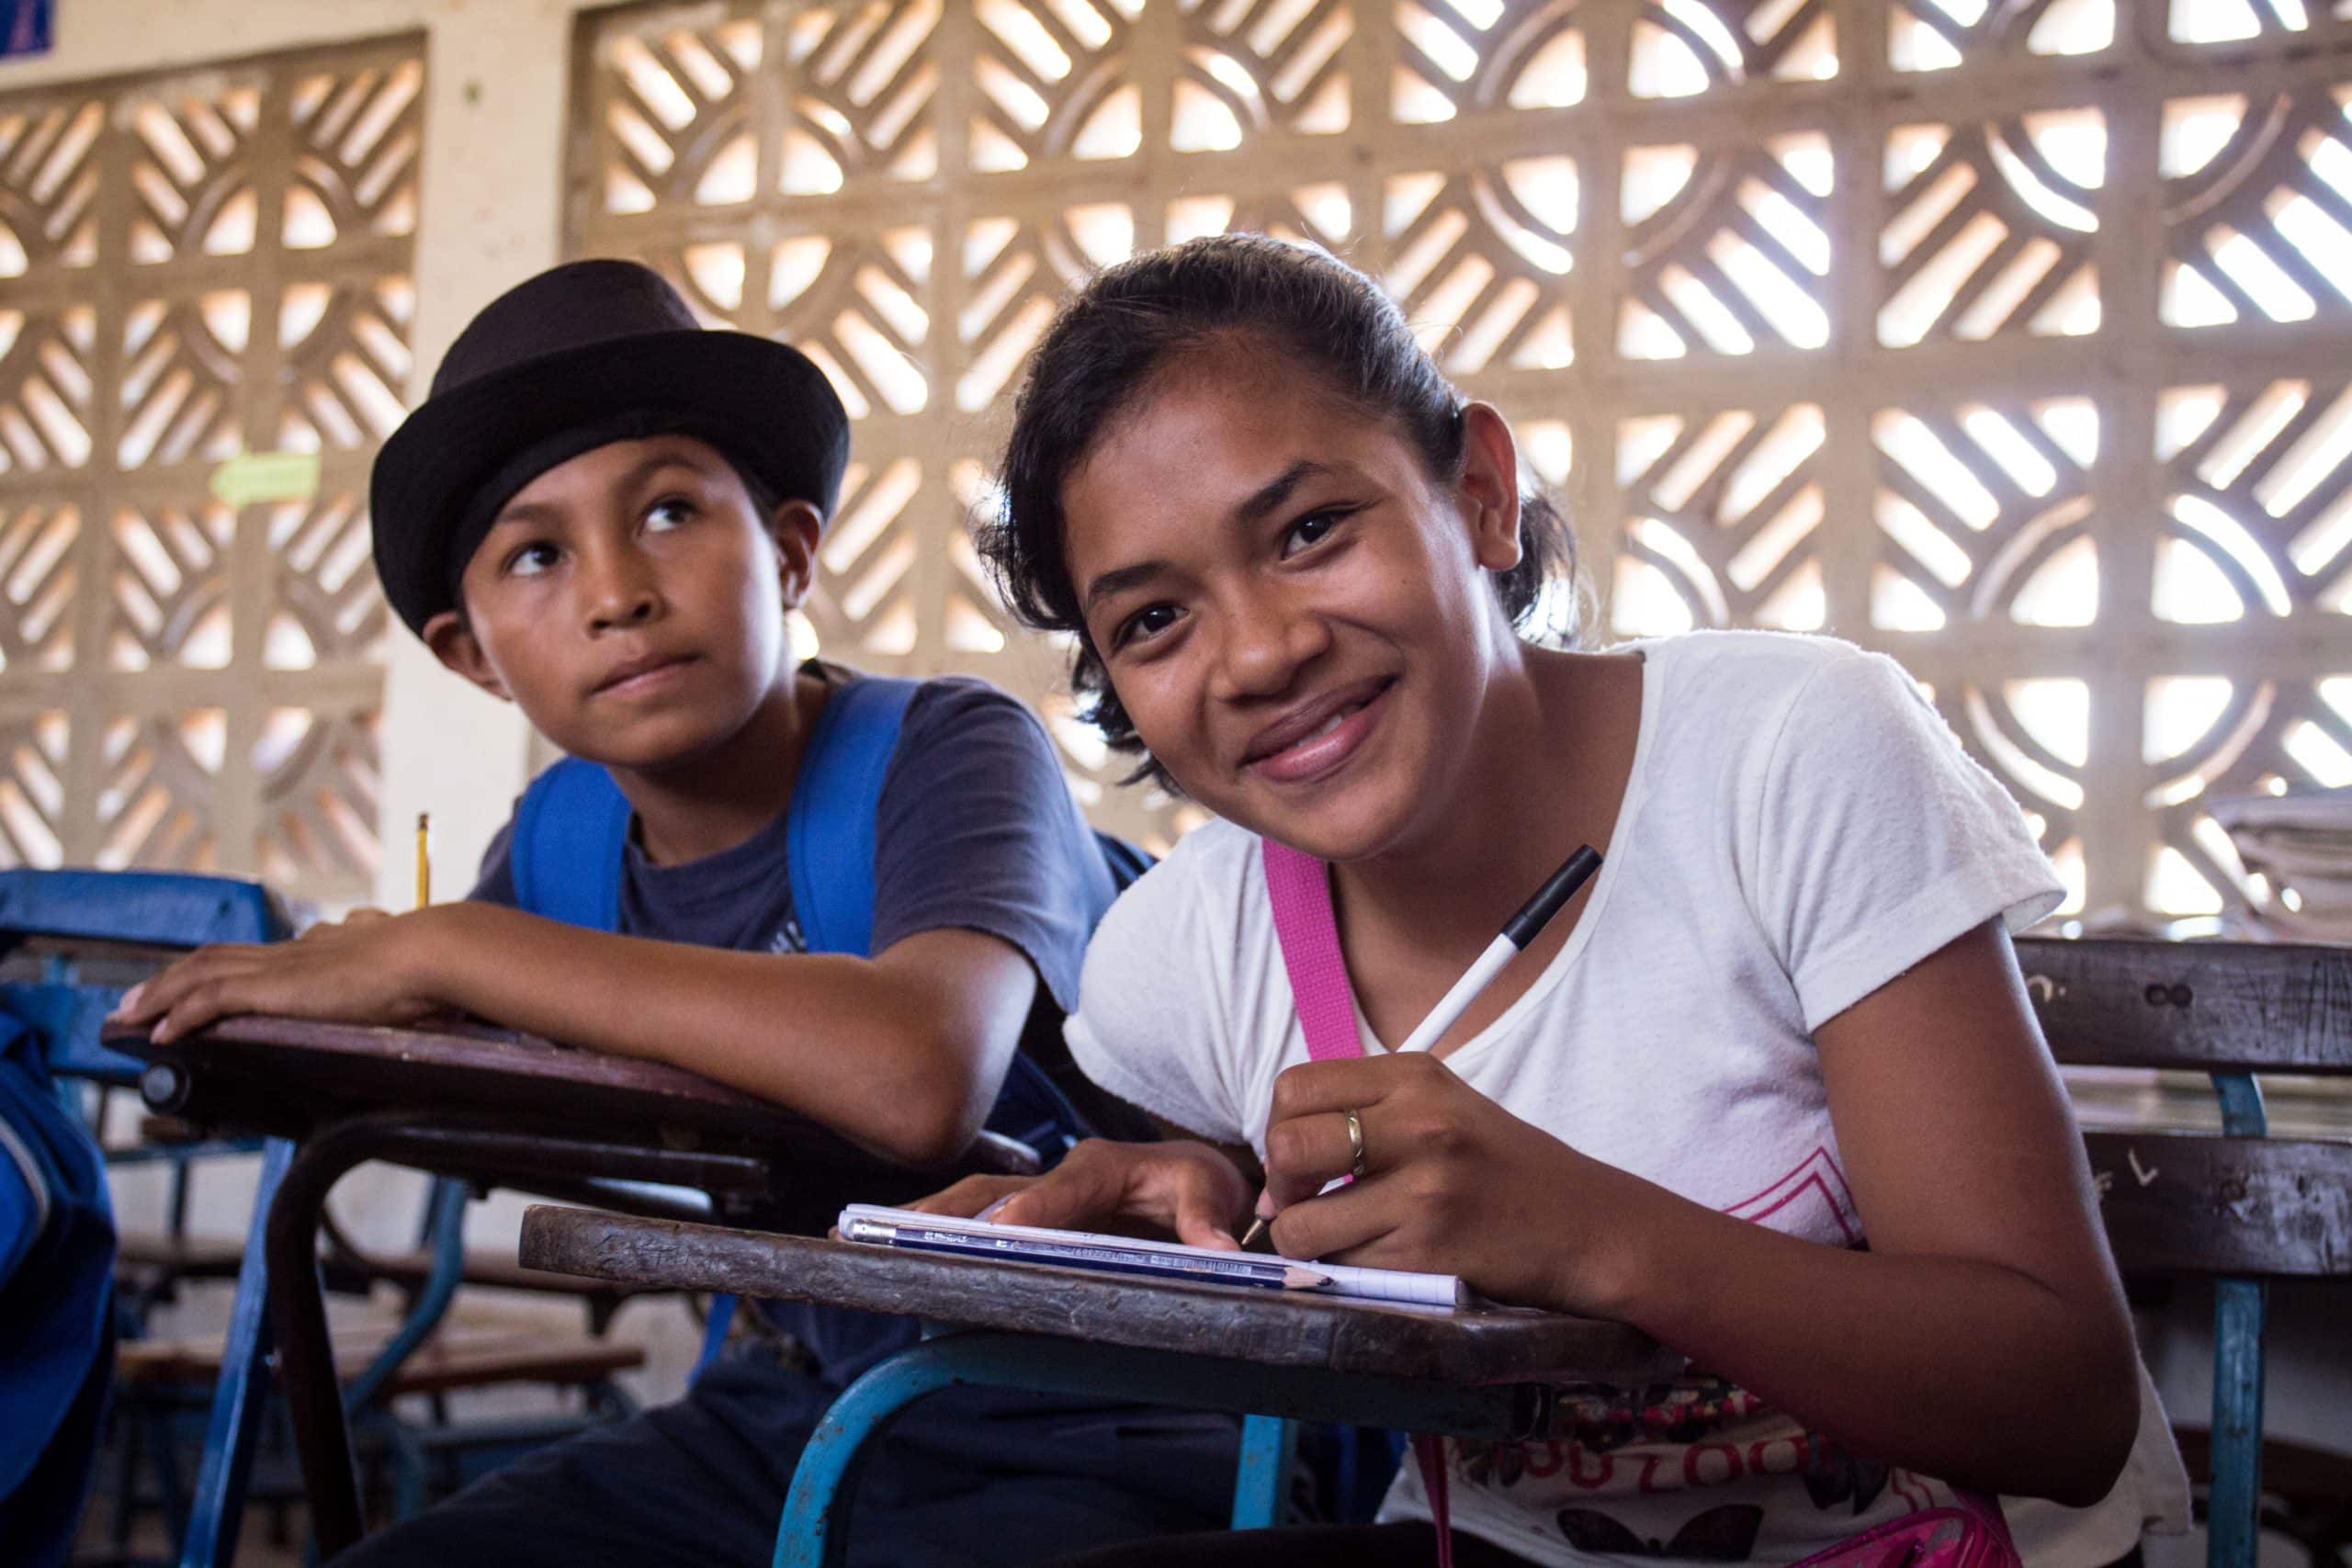 Sprockler stories show positive impact of Hotel con Corazon’s education programmes in Nicaragua